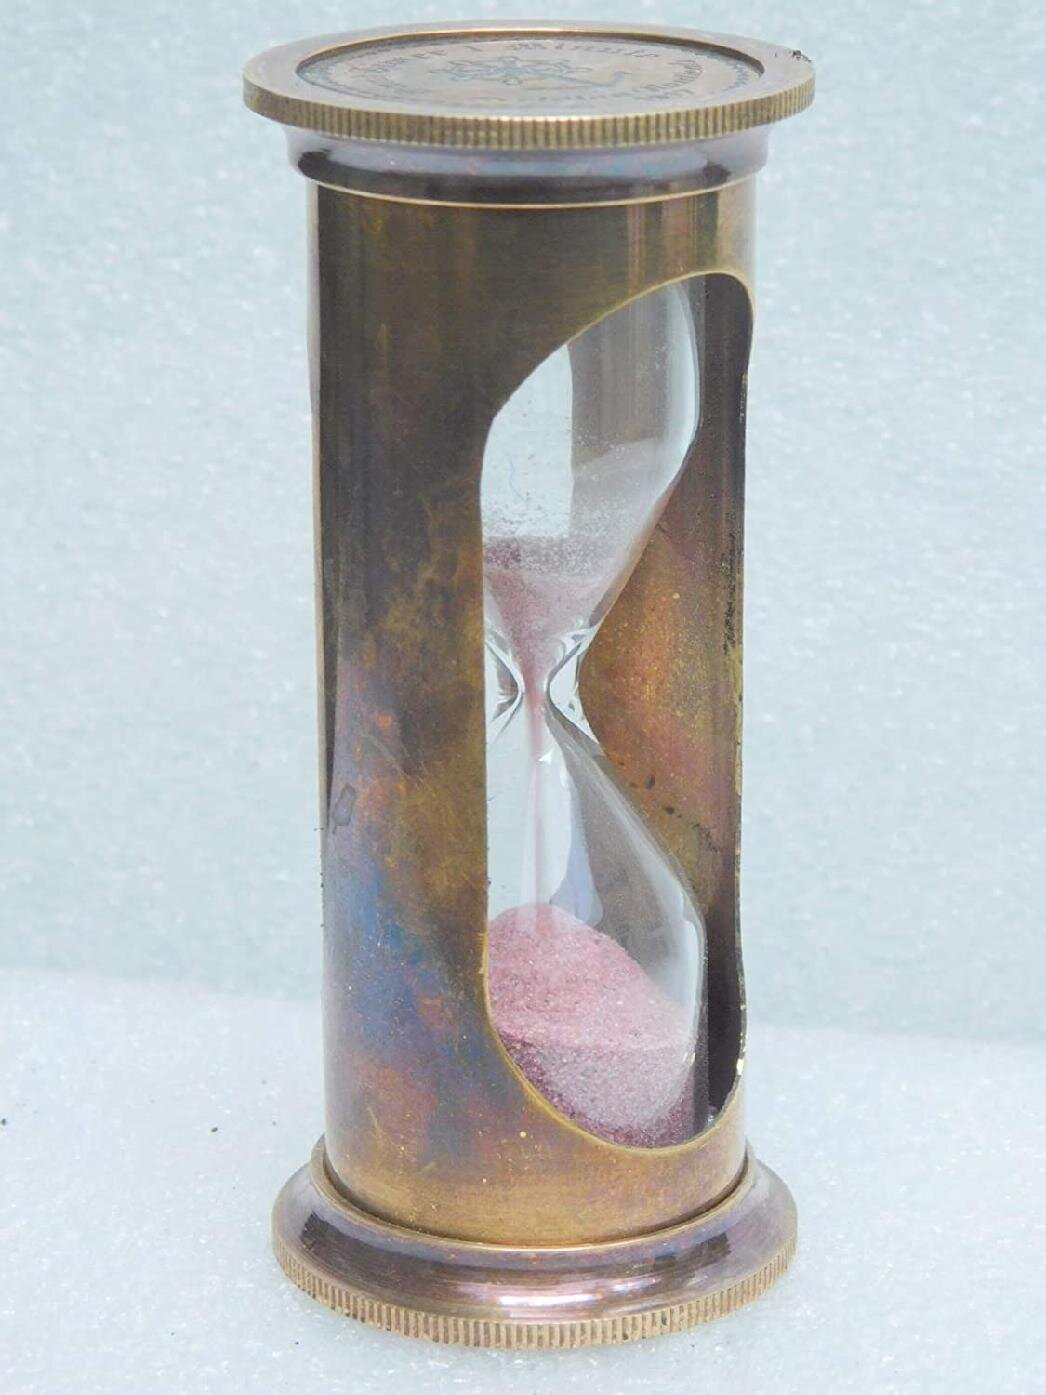 REPLICA VINTAGE NAUTICAL BRASS SAND TIMER HOURGLASS WITH COMPASS 